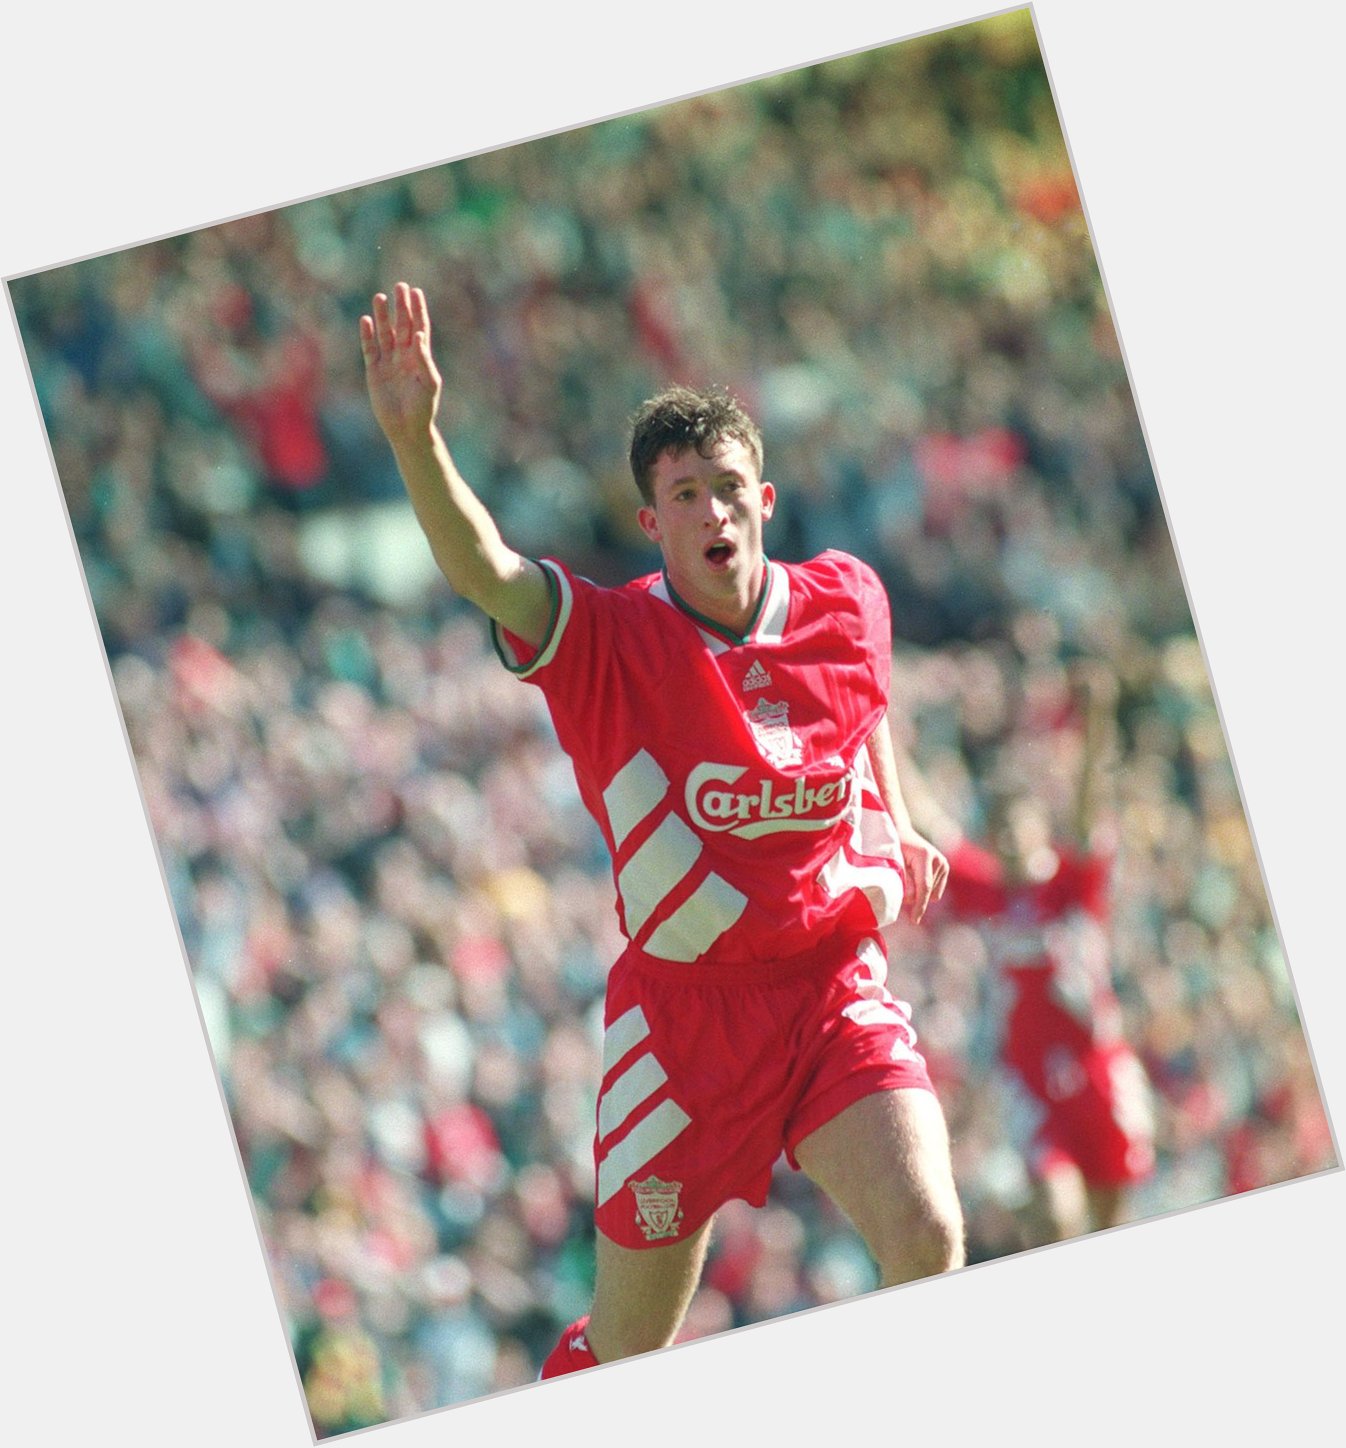  - 330 games: 171 goals

- Better than a goal every 2 games

Happy birthday Liverpool legend Robbie Fowler 